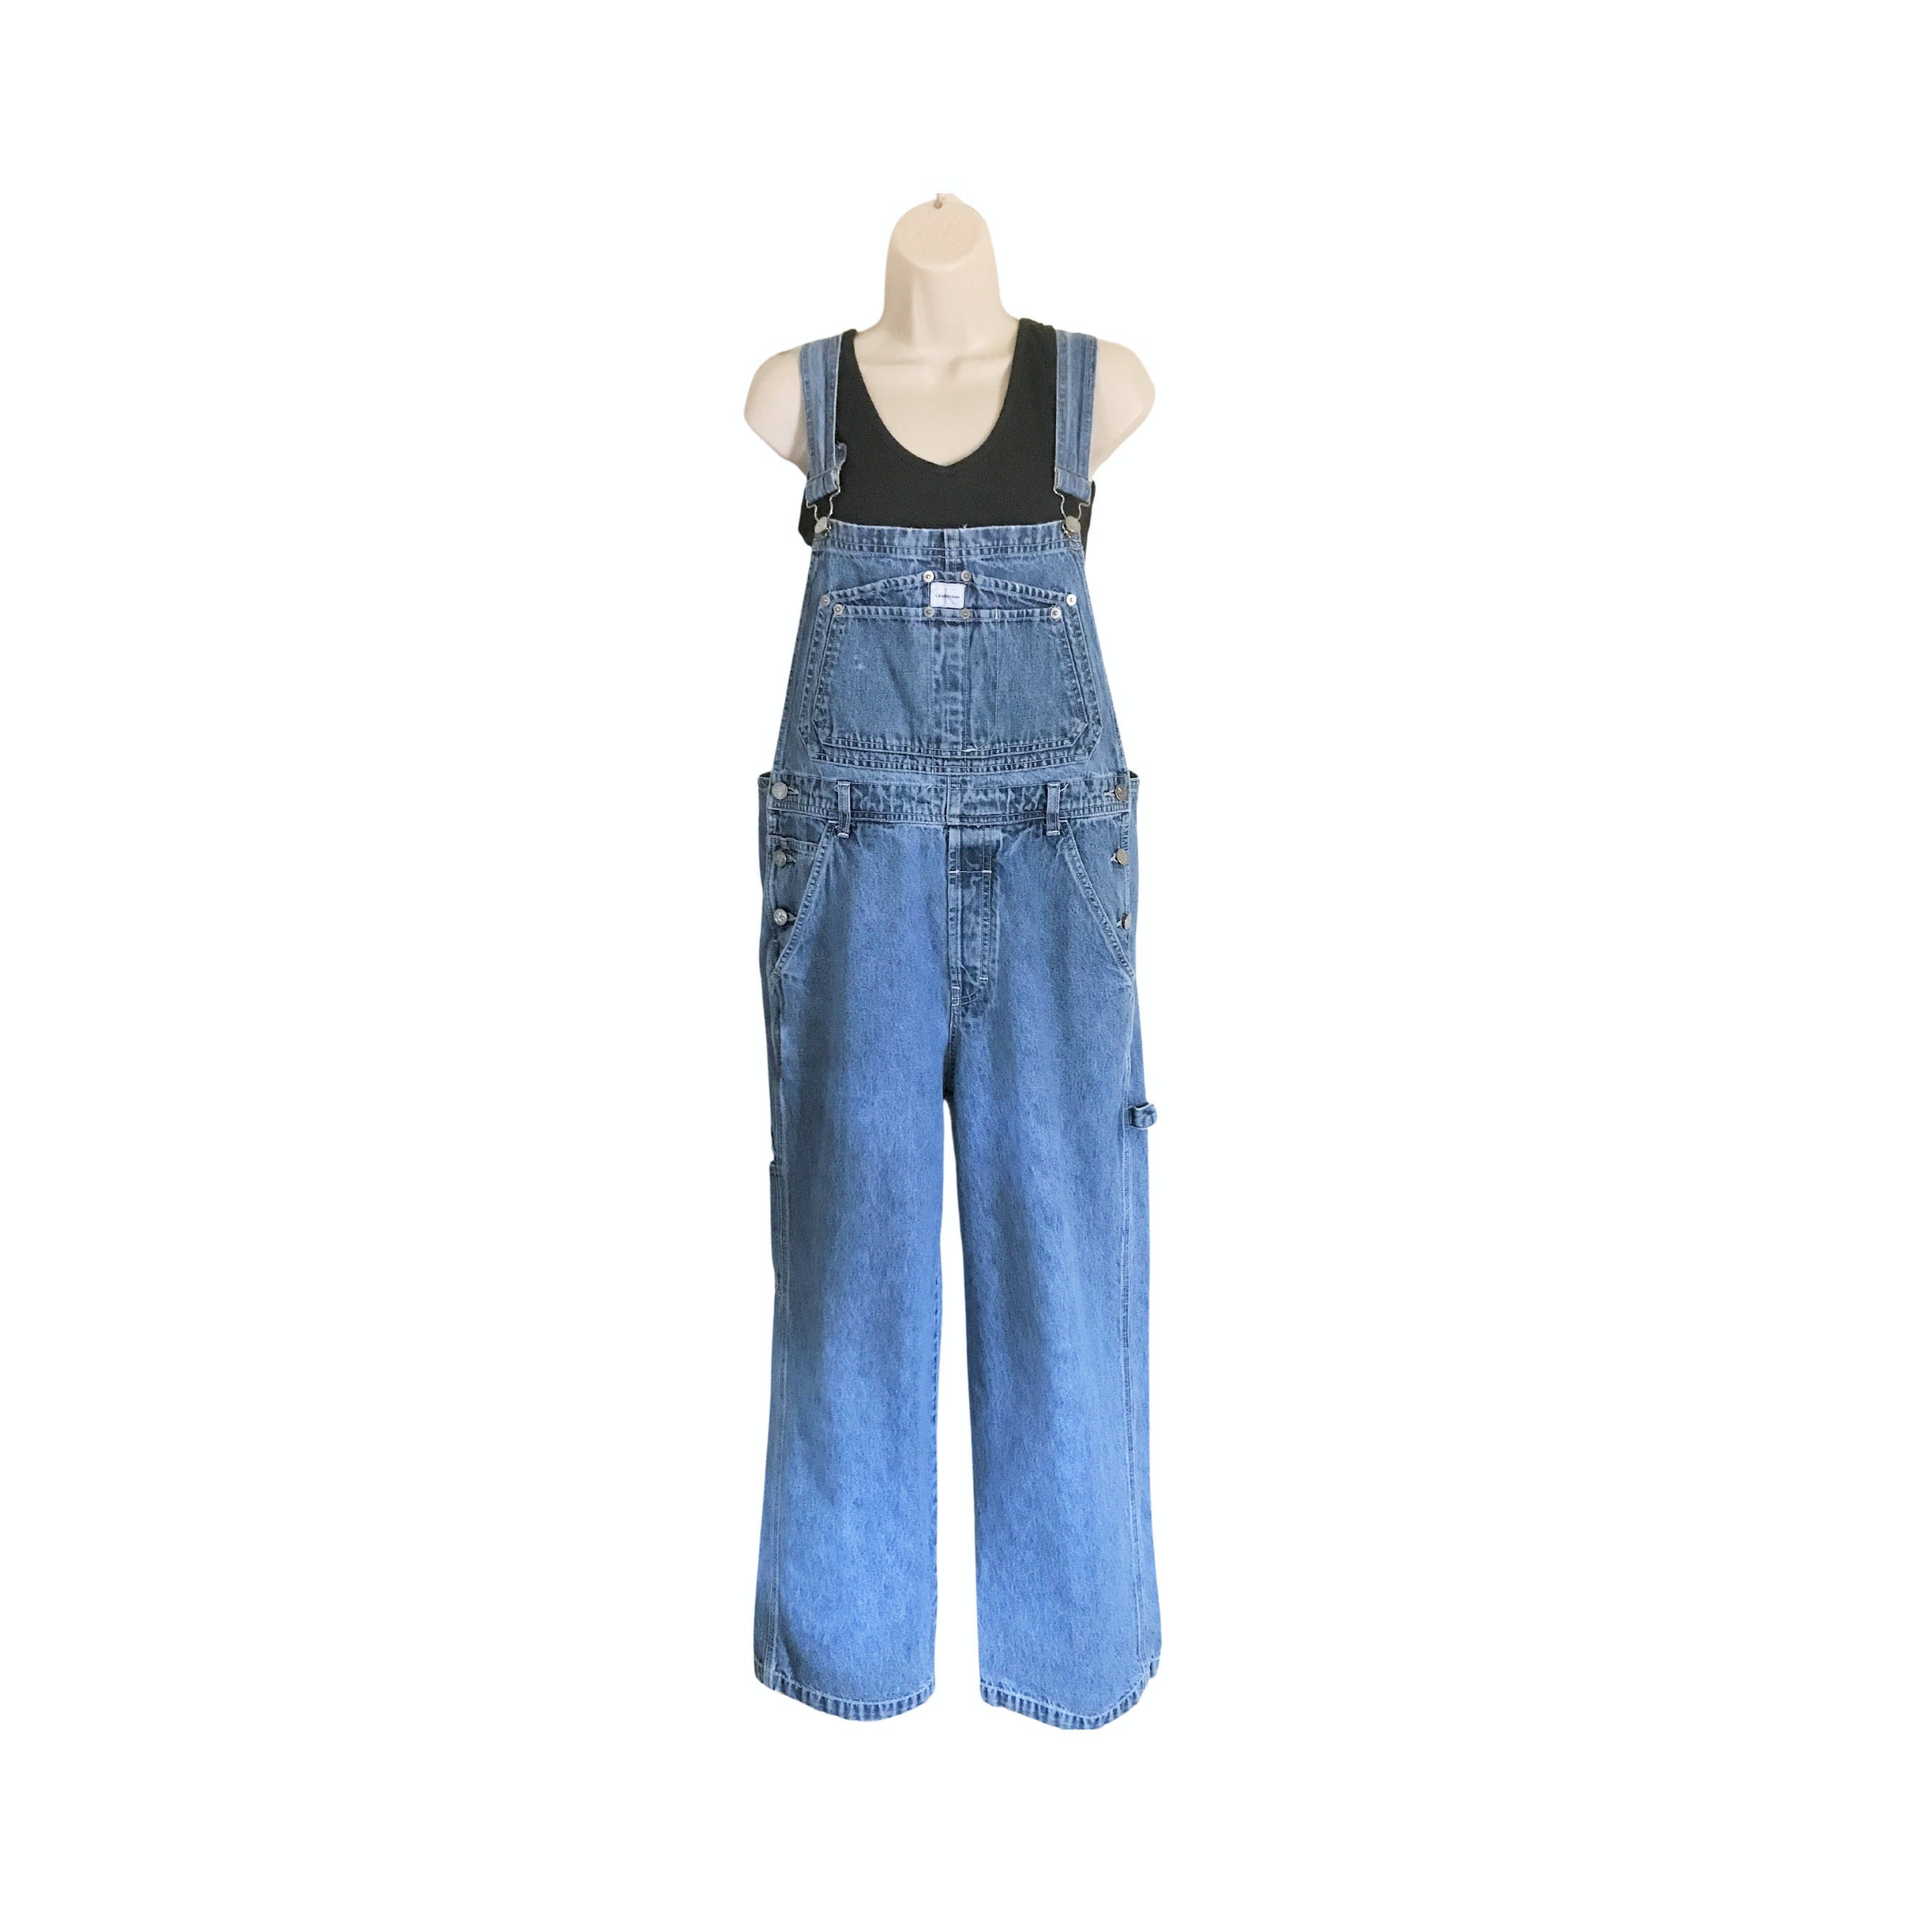 BaoDan Women's Baggy Oversized Retro Dungarees with Pockets Cotton Vintage Printed Denim Casual Sleeveless Overall Long Jumpsuit Playsuit Trousers Pants Plus Size Loose Wide Leg Buckle 